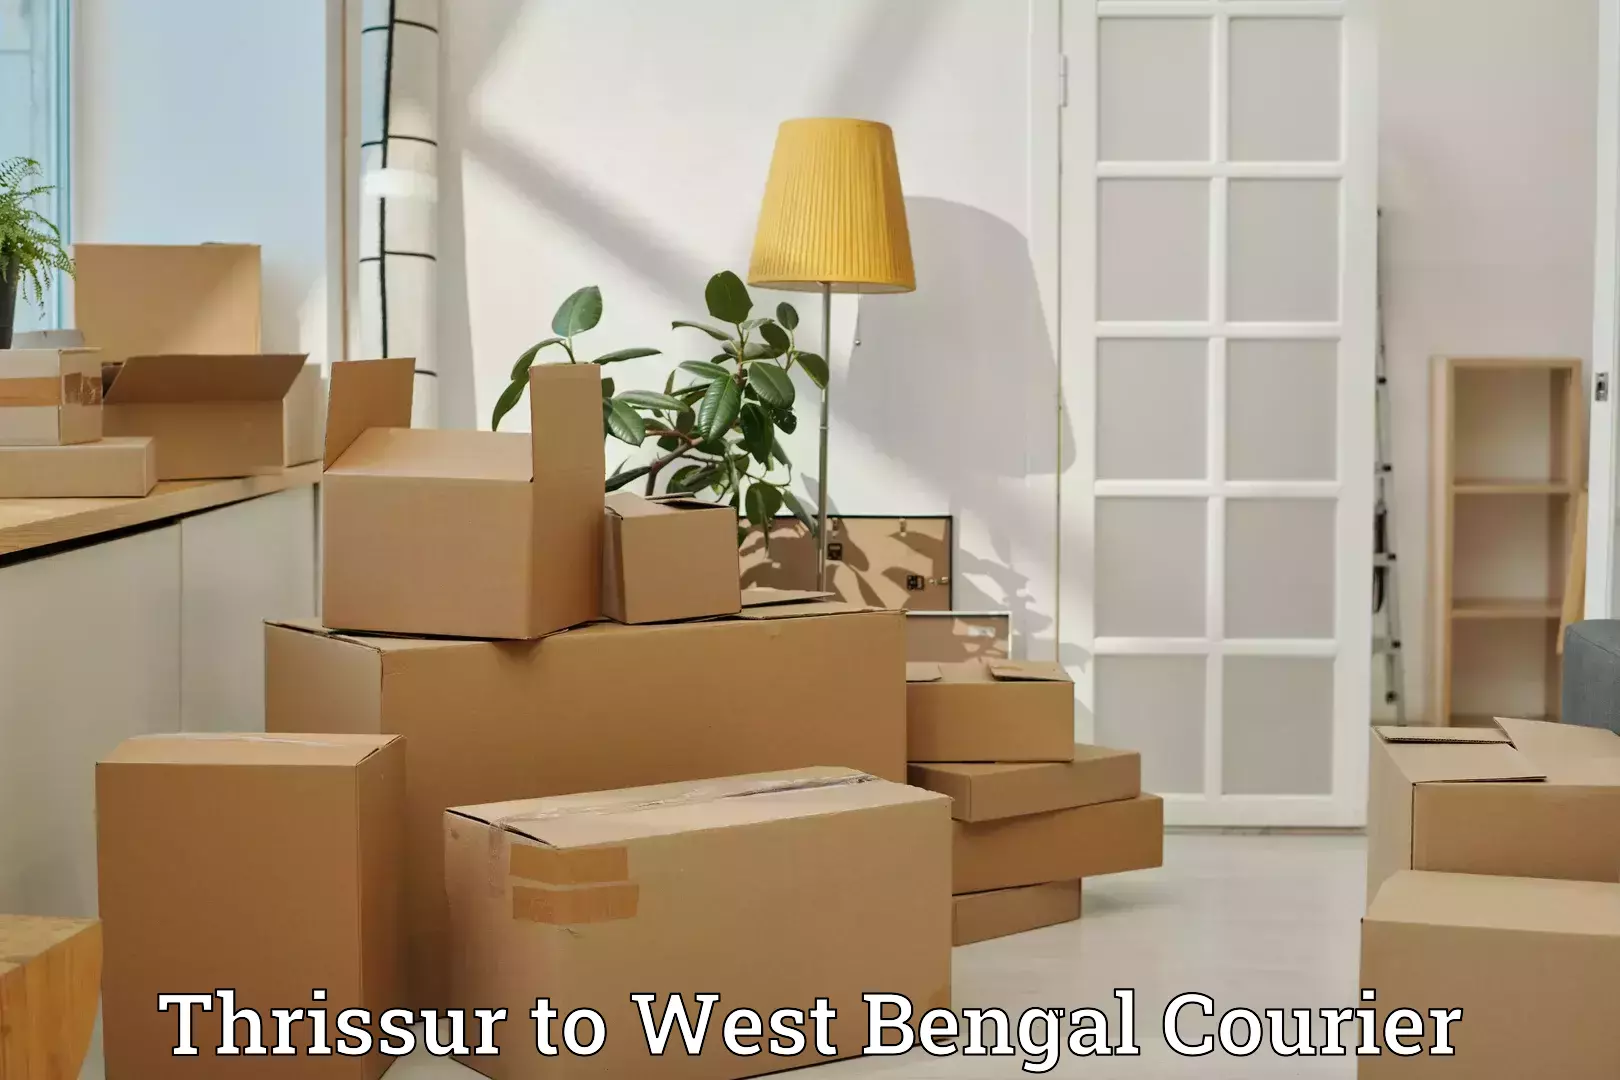 Express luggage delivery Thrissur to Kolkata